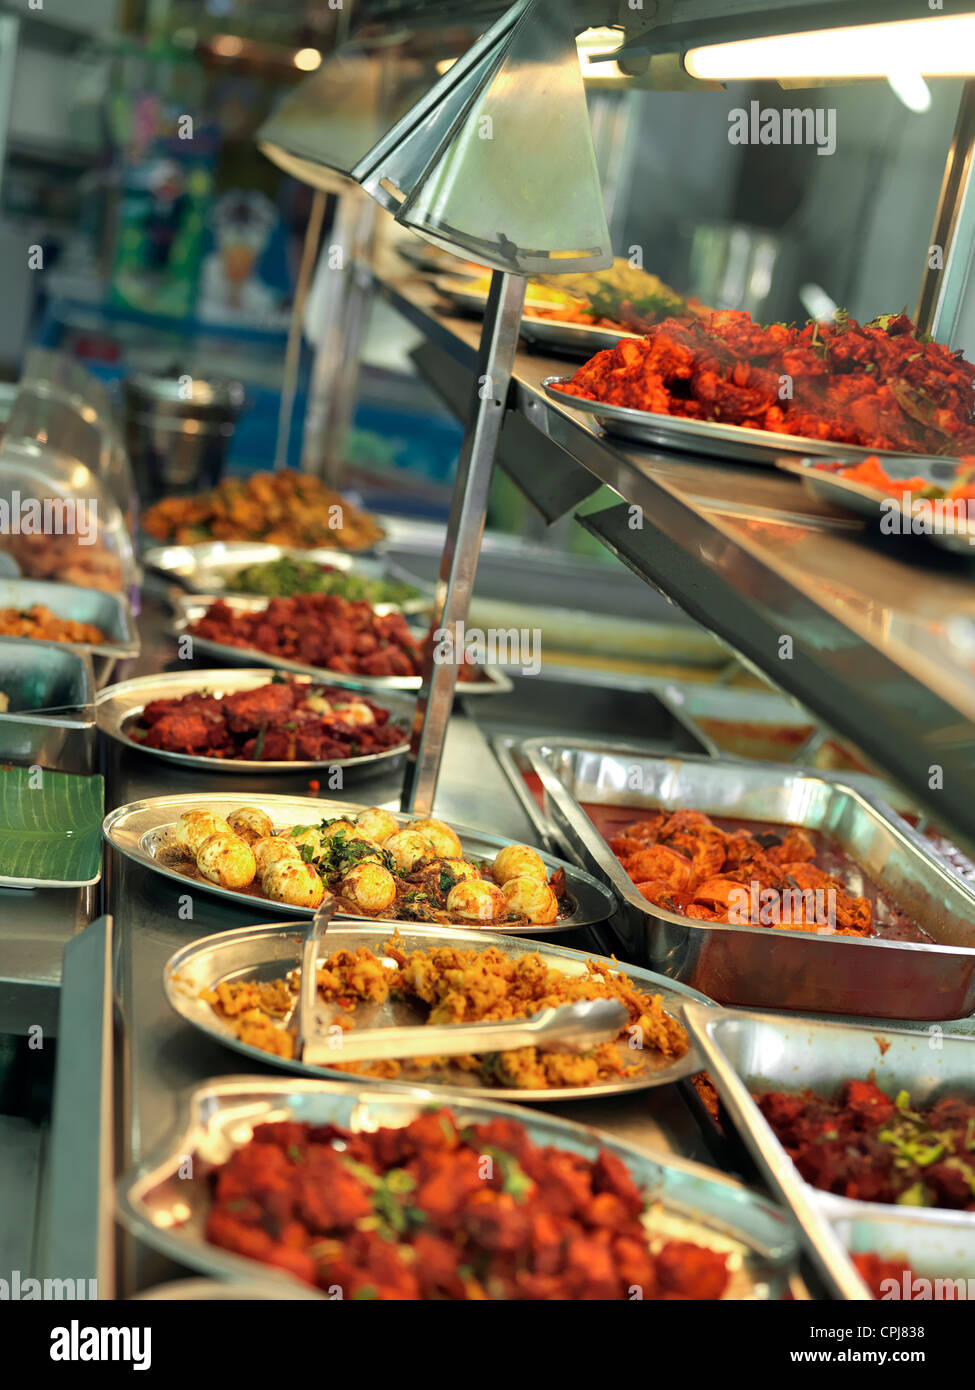 A buffet at an Indian restaurant in Johor showcasing many traditional Indian  delicacies Stock Photo - Alamy